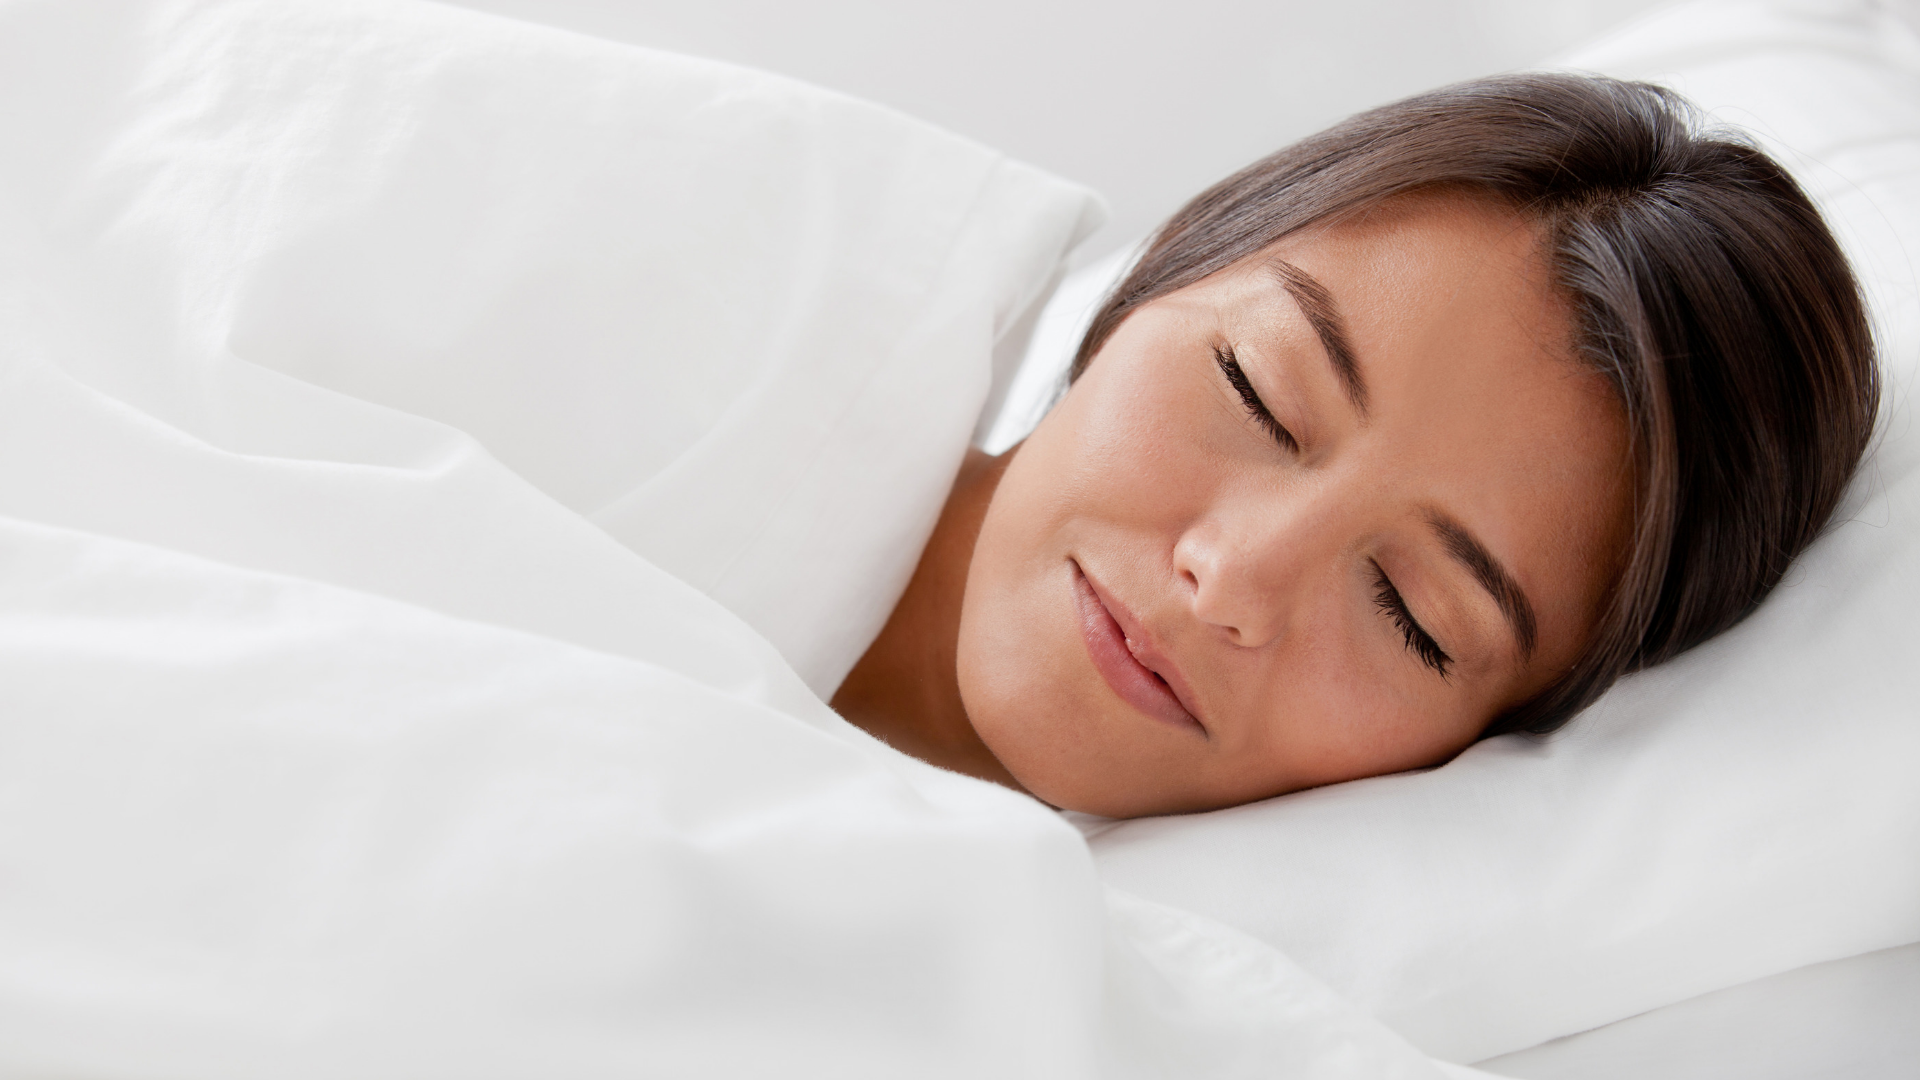 What helps adults get to sleep?